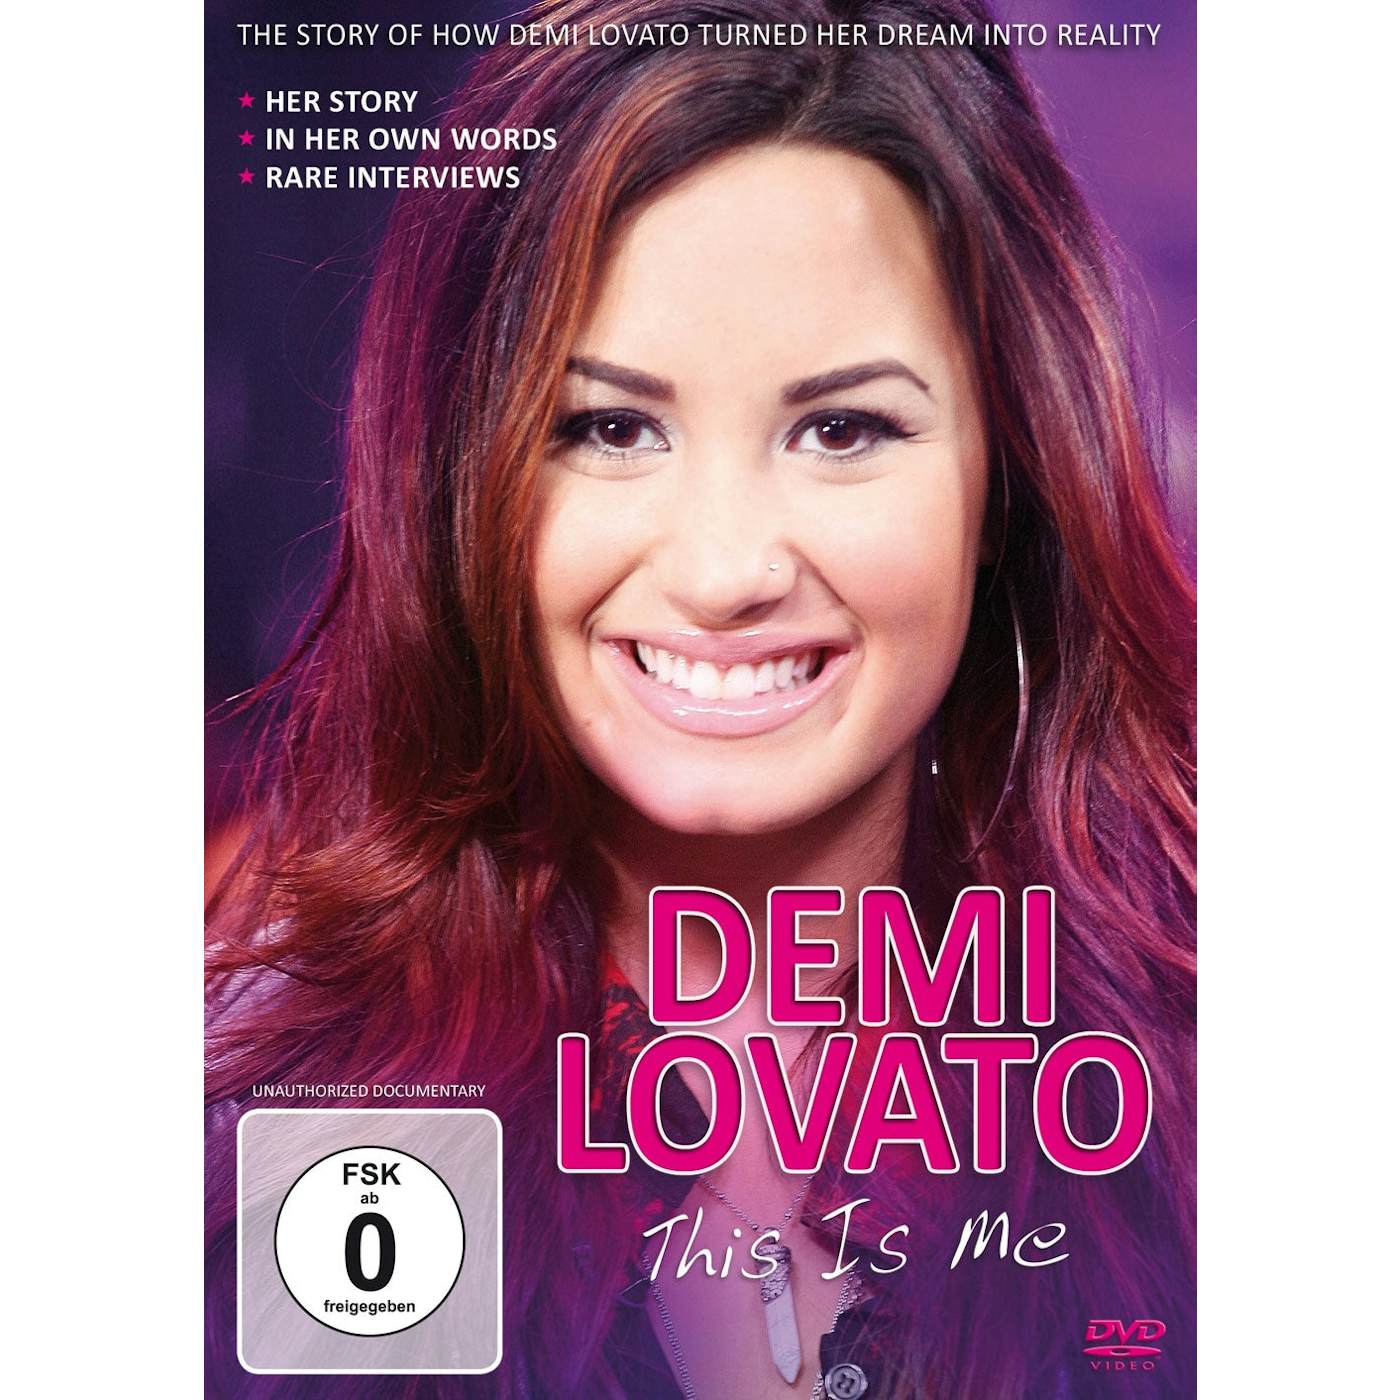 Demi Lovato DVD - This Is Me Documentary